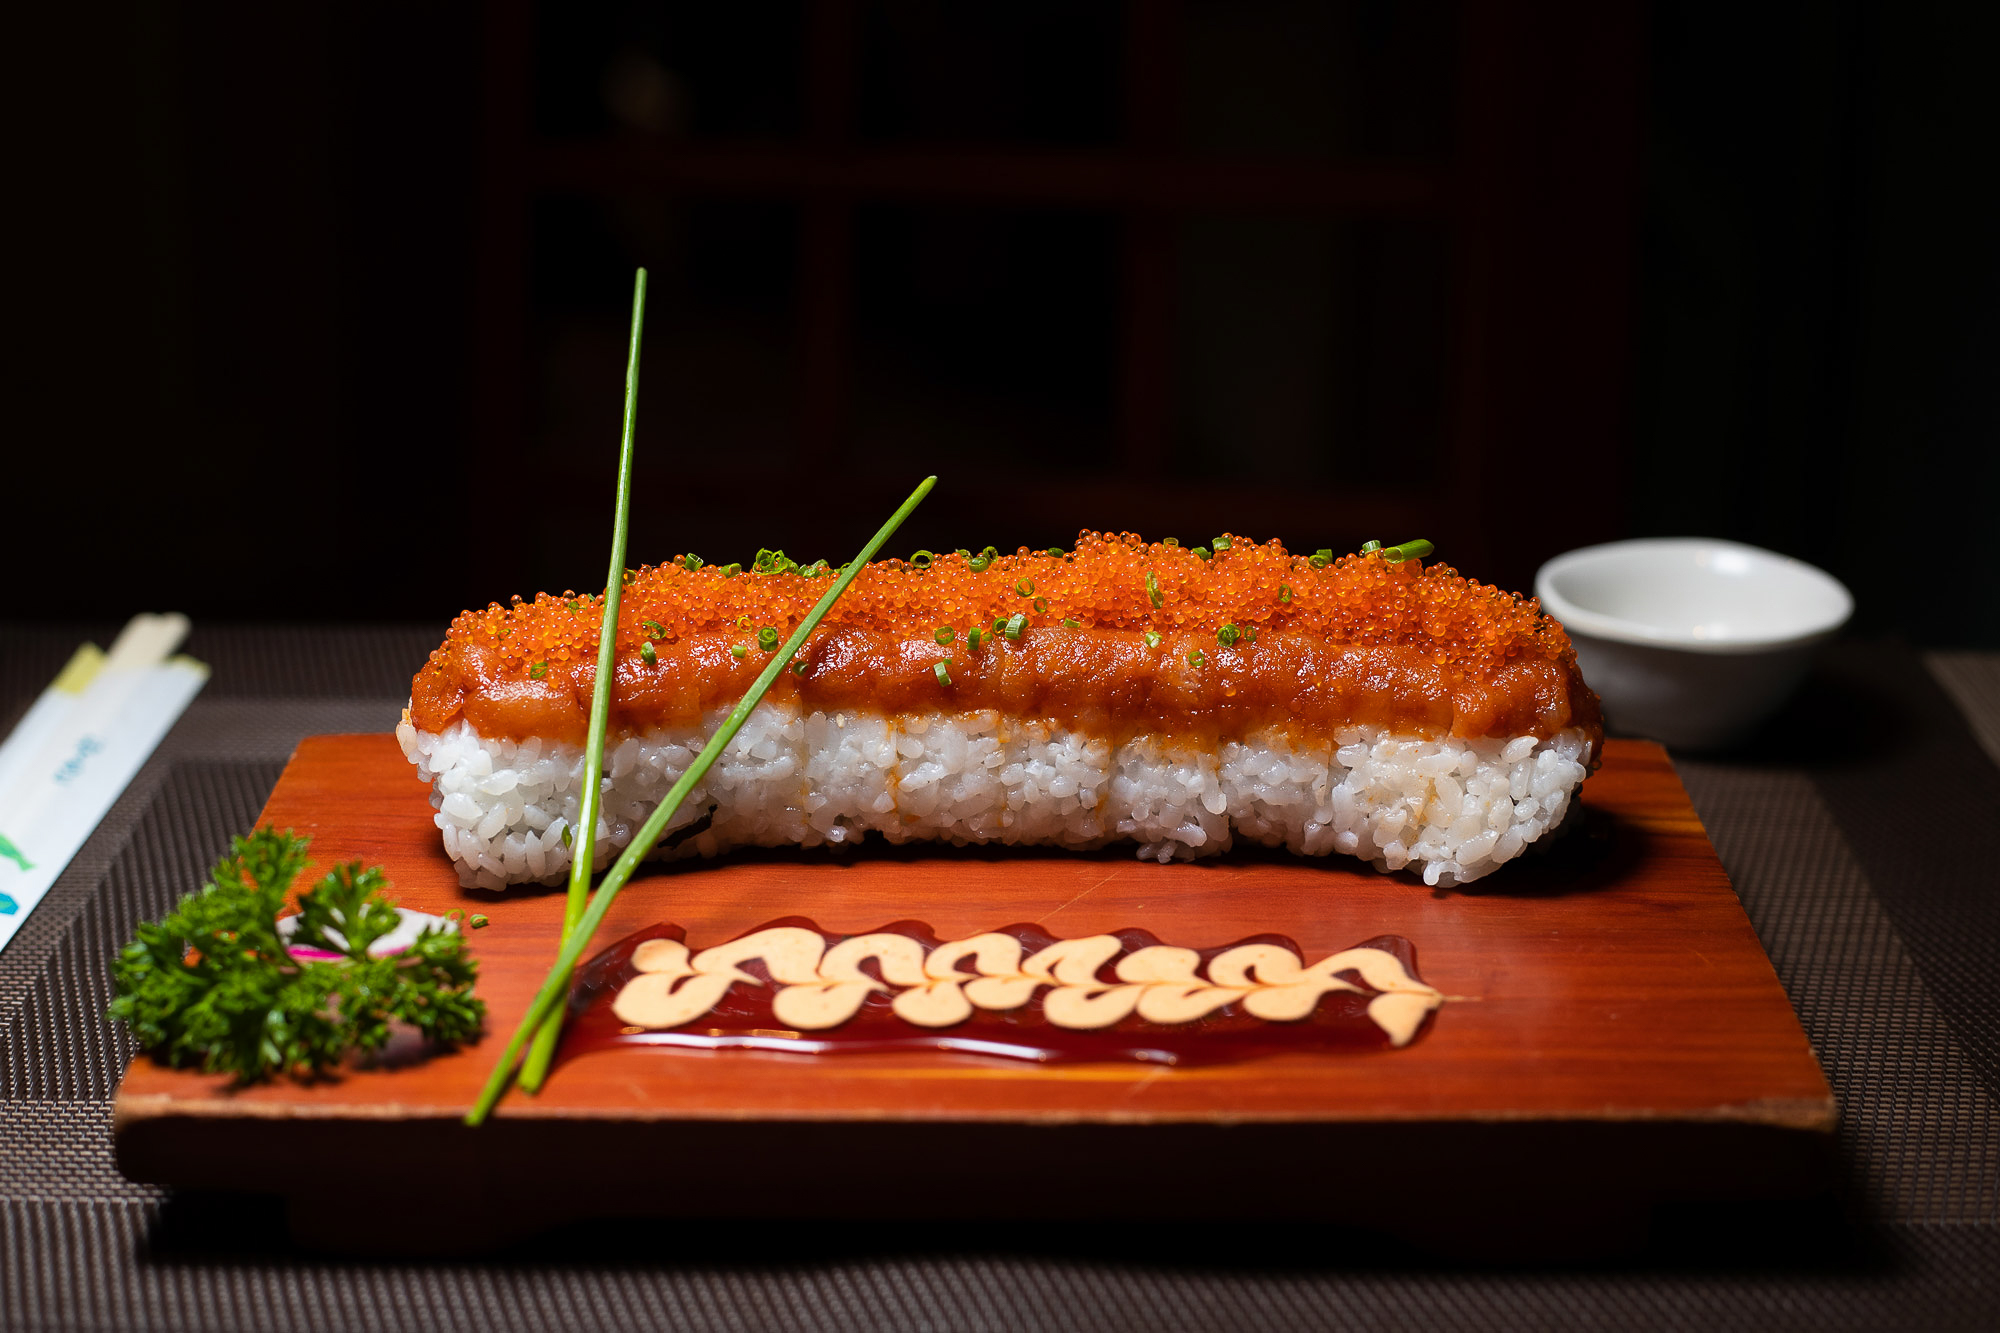 Sushi roll with fish eggs and salmon presented on a dark red wooden board. With a spicy red and yellow sauce with a wavy pattern. Dish is framed in centre of image with a black background. Aberdeen Food photographer Scott Cameron Baxter.